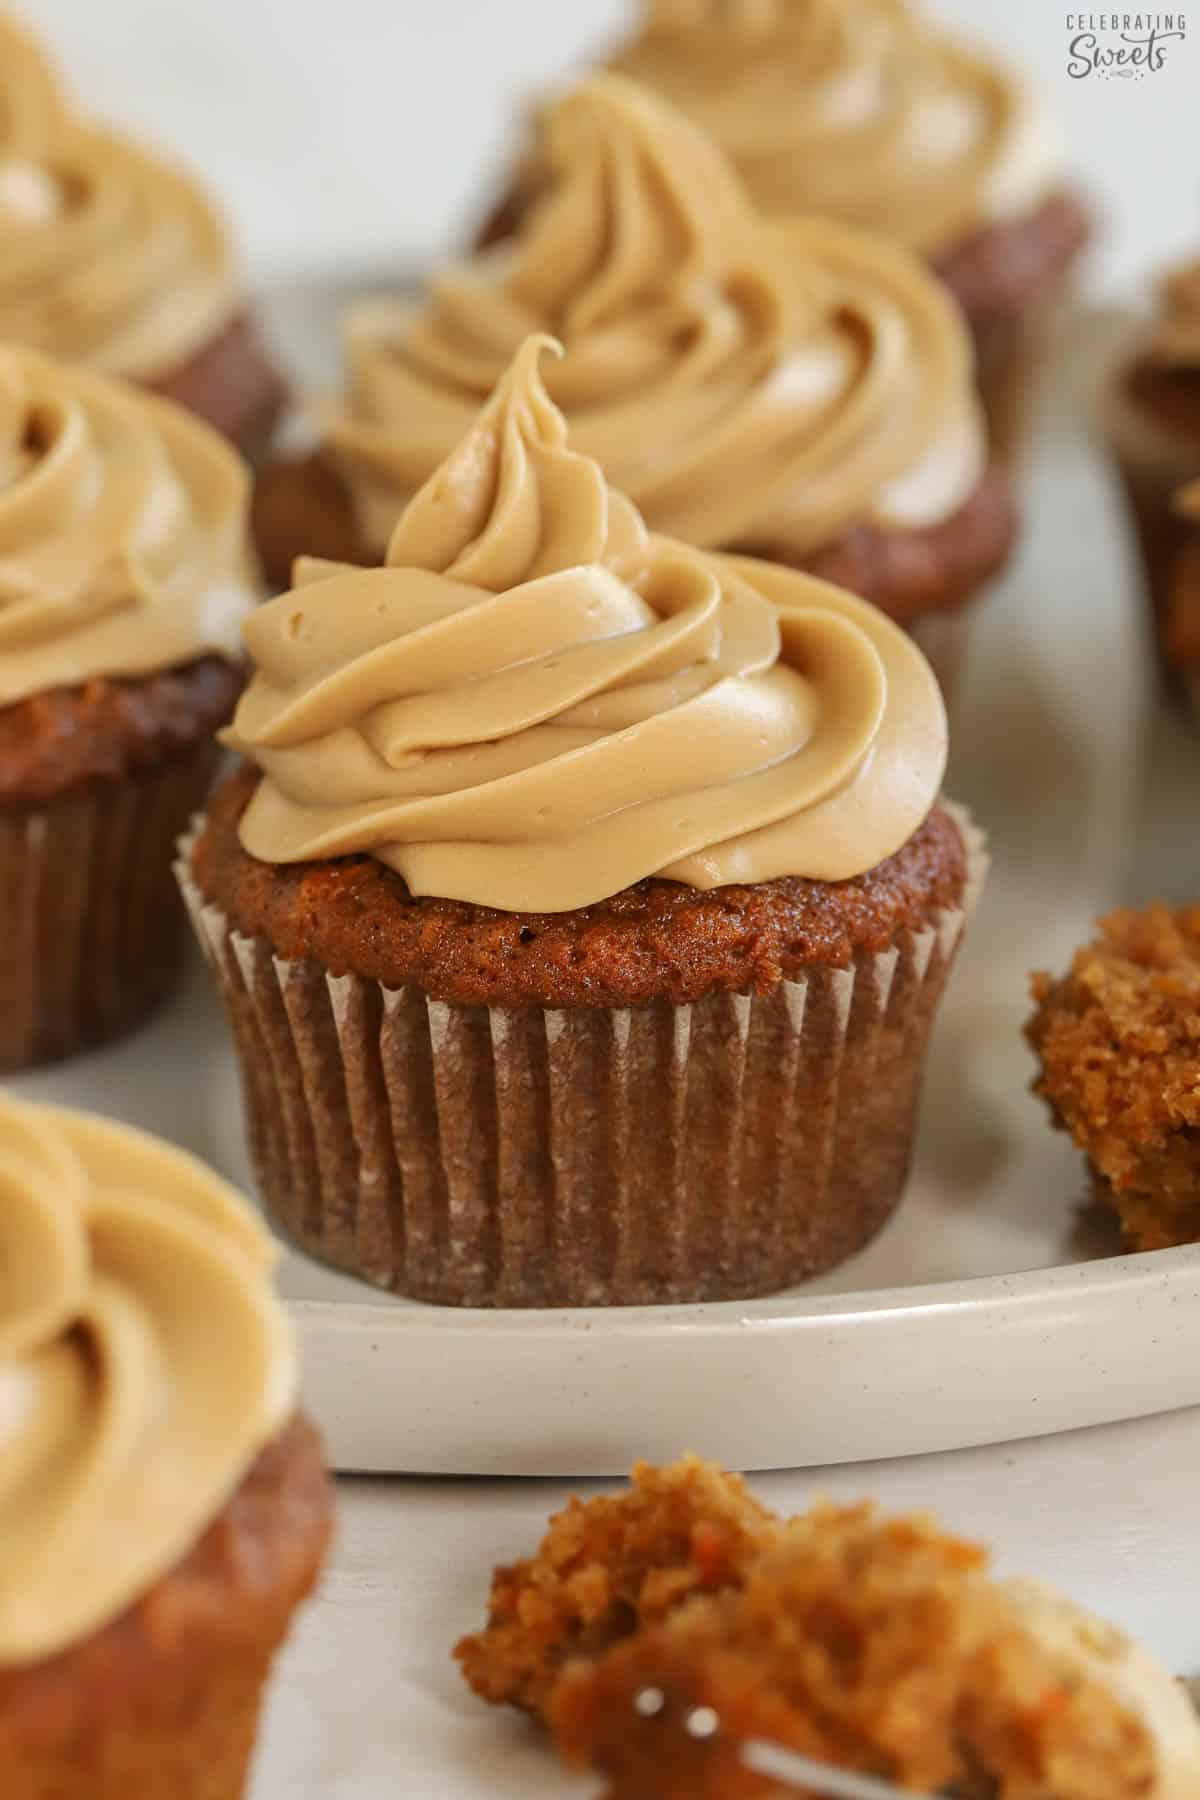 Carrot cake cupcake topped with brown sugar frosting on a grey plate.